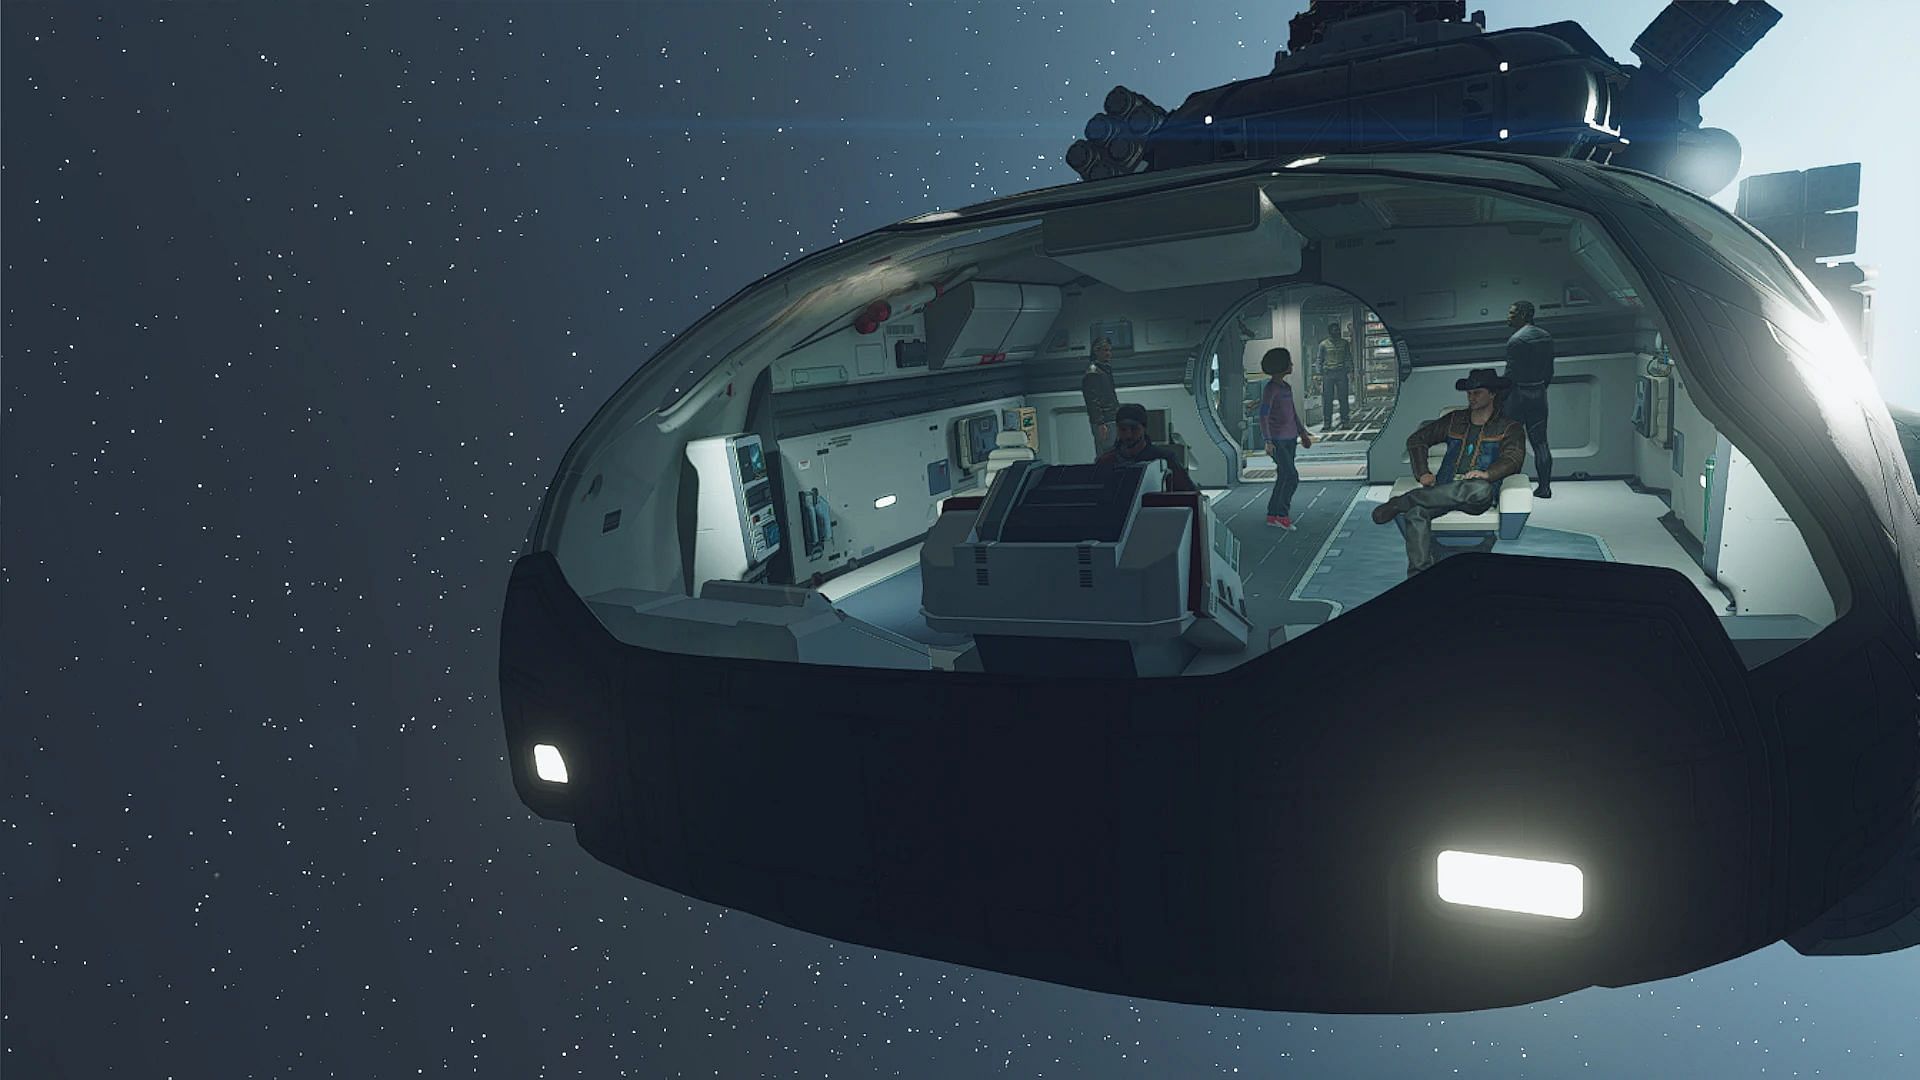 A fun modular ship-building system leads nowhere in space. (Image via Bethesda Game Studios)